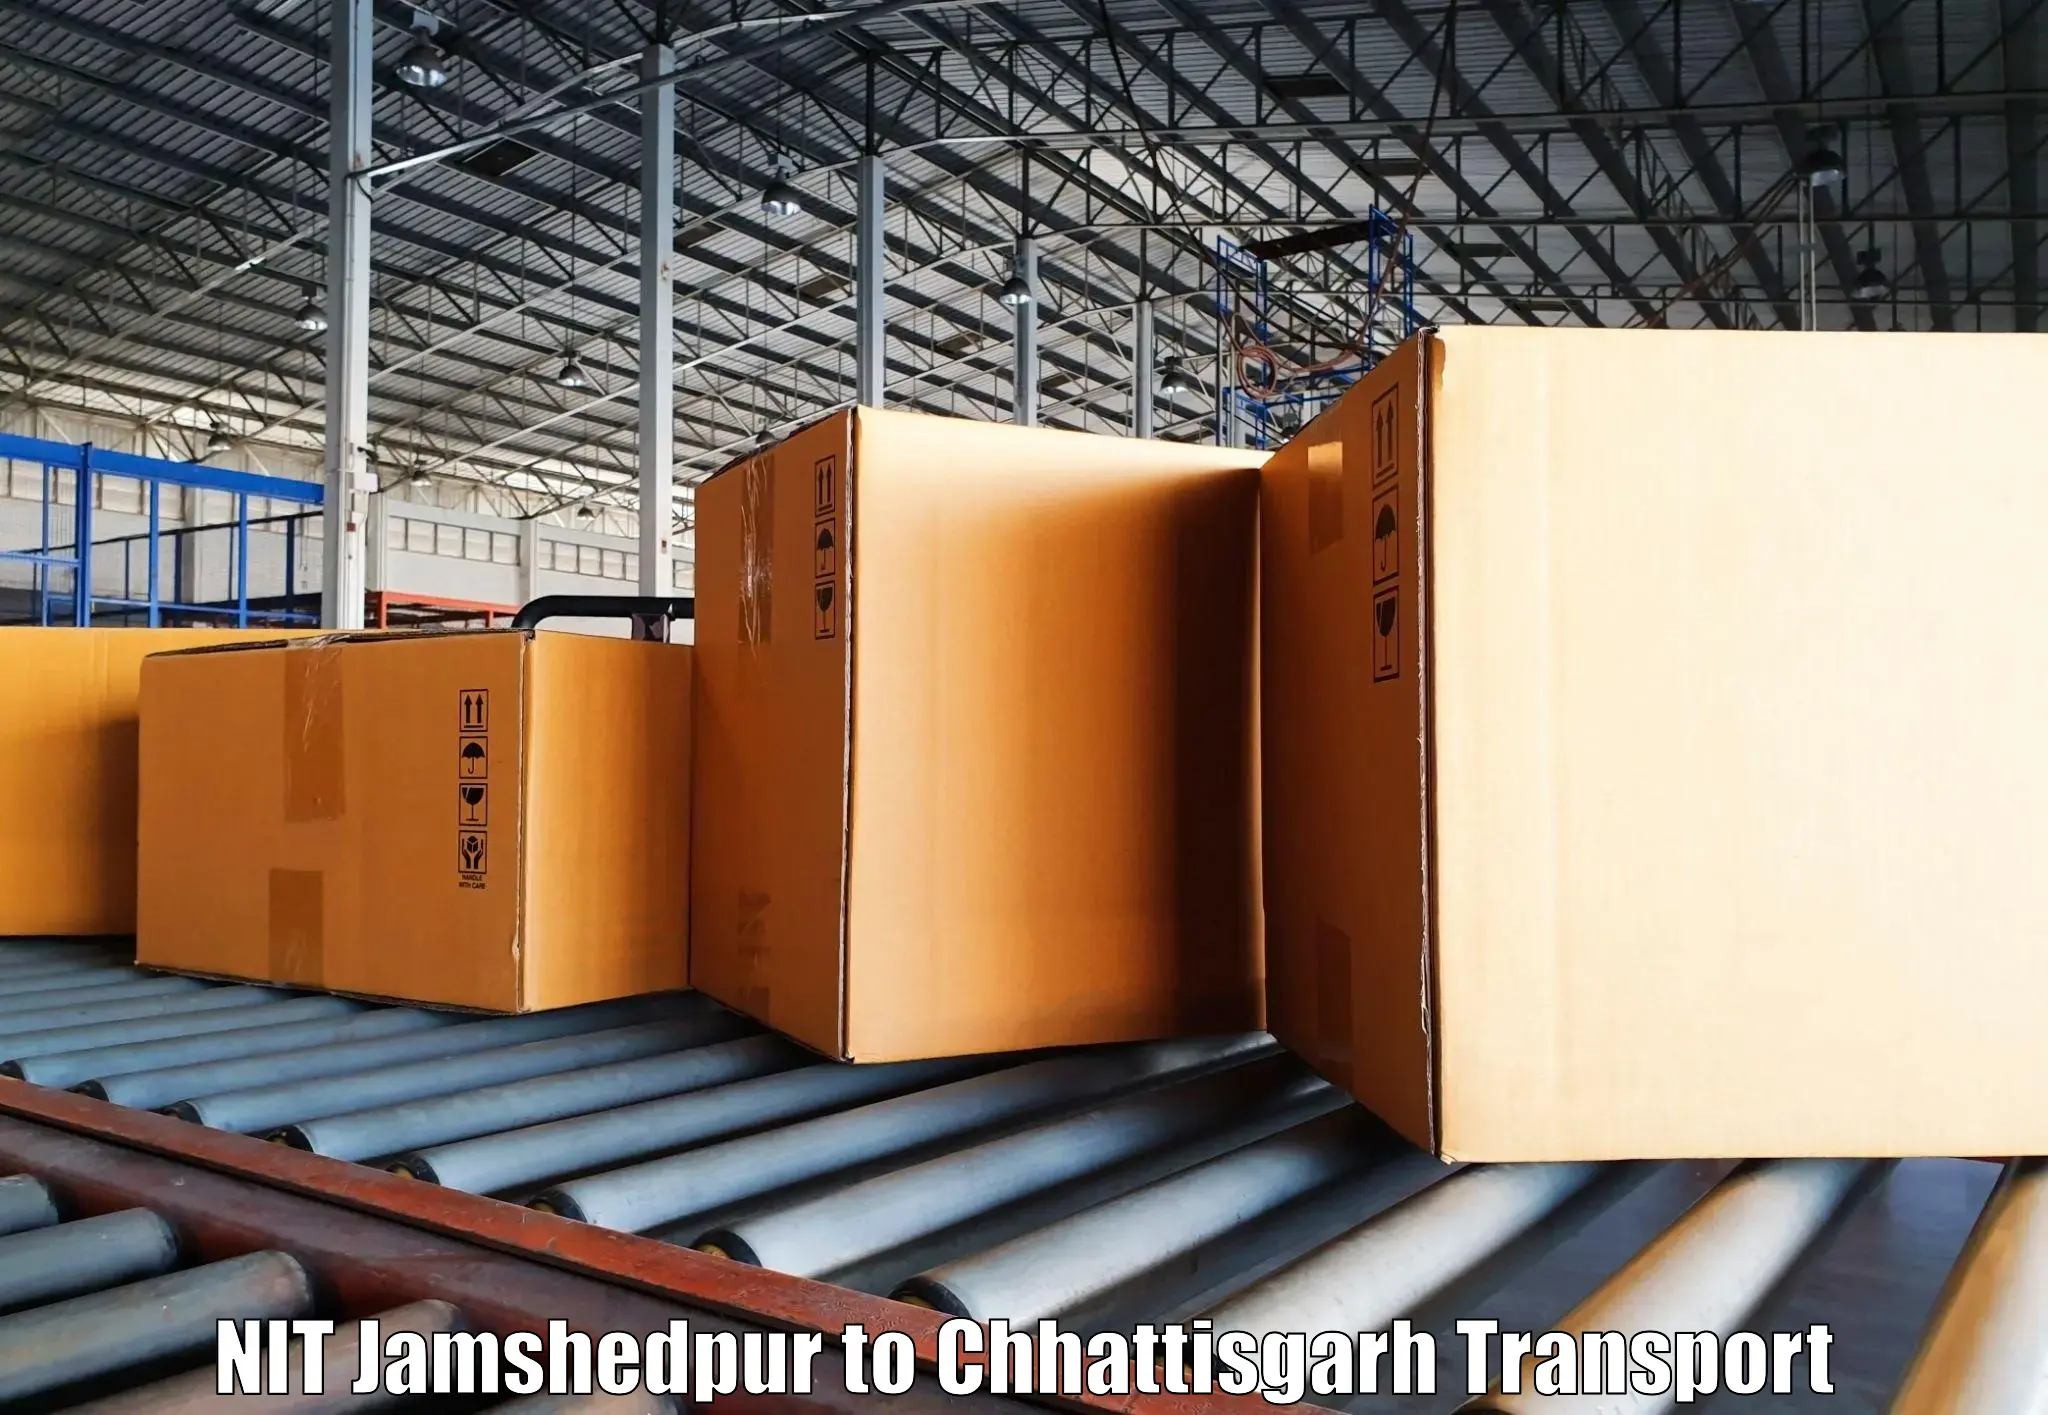 Transport bike from one state to another NIT Jamshedpur to Jashpur